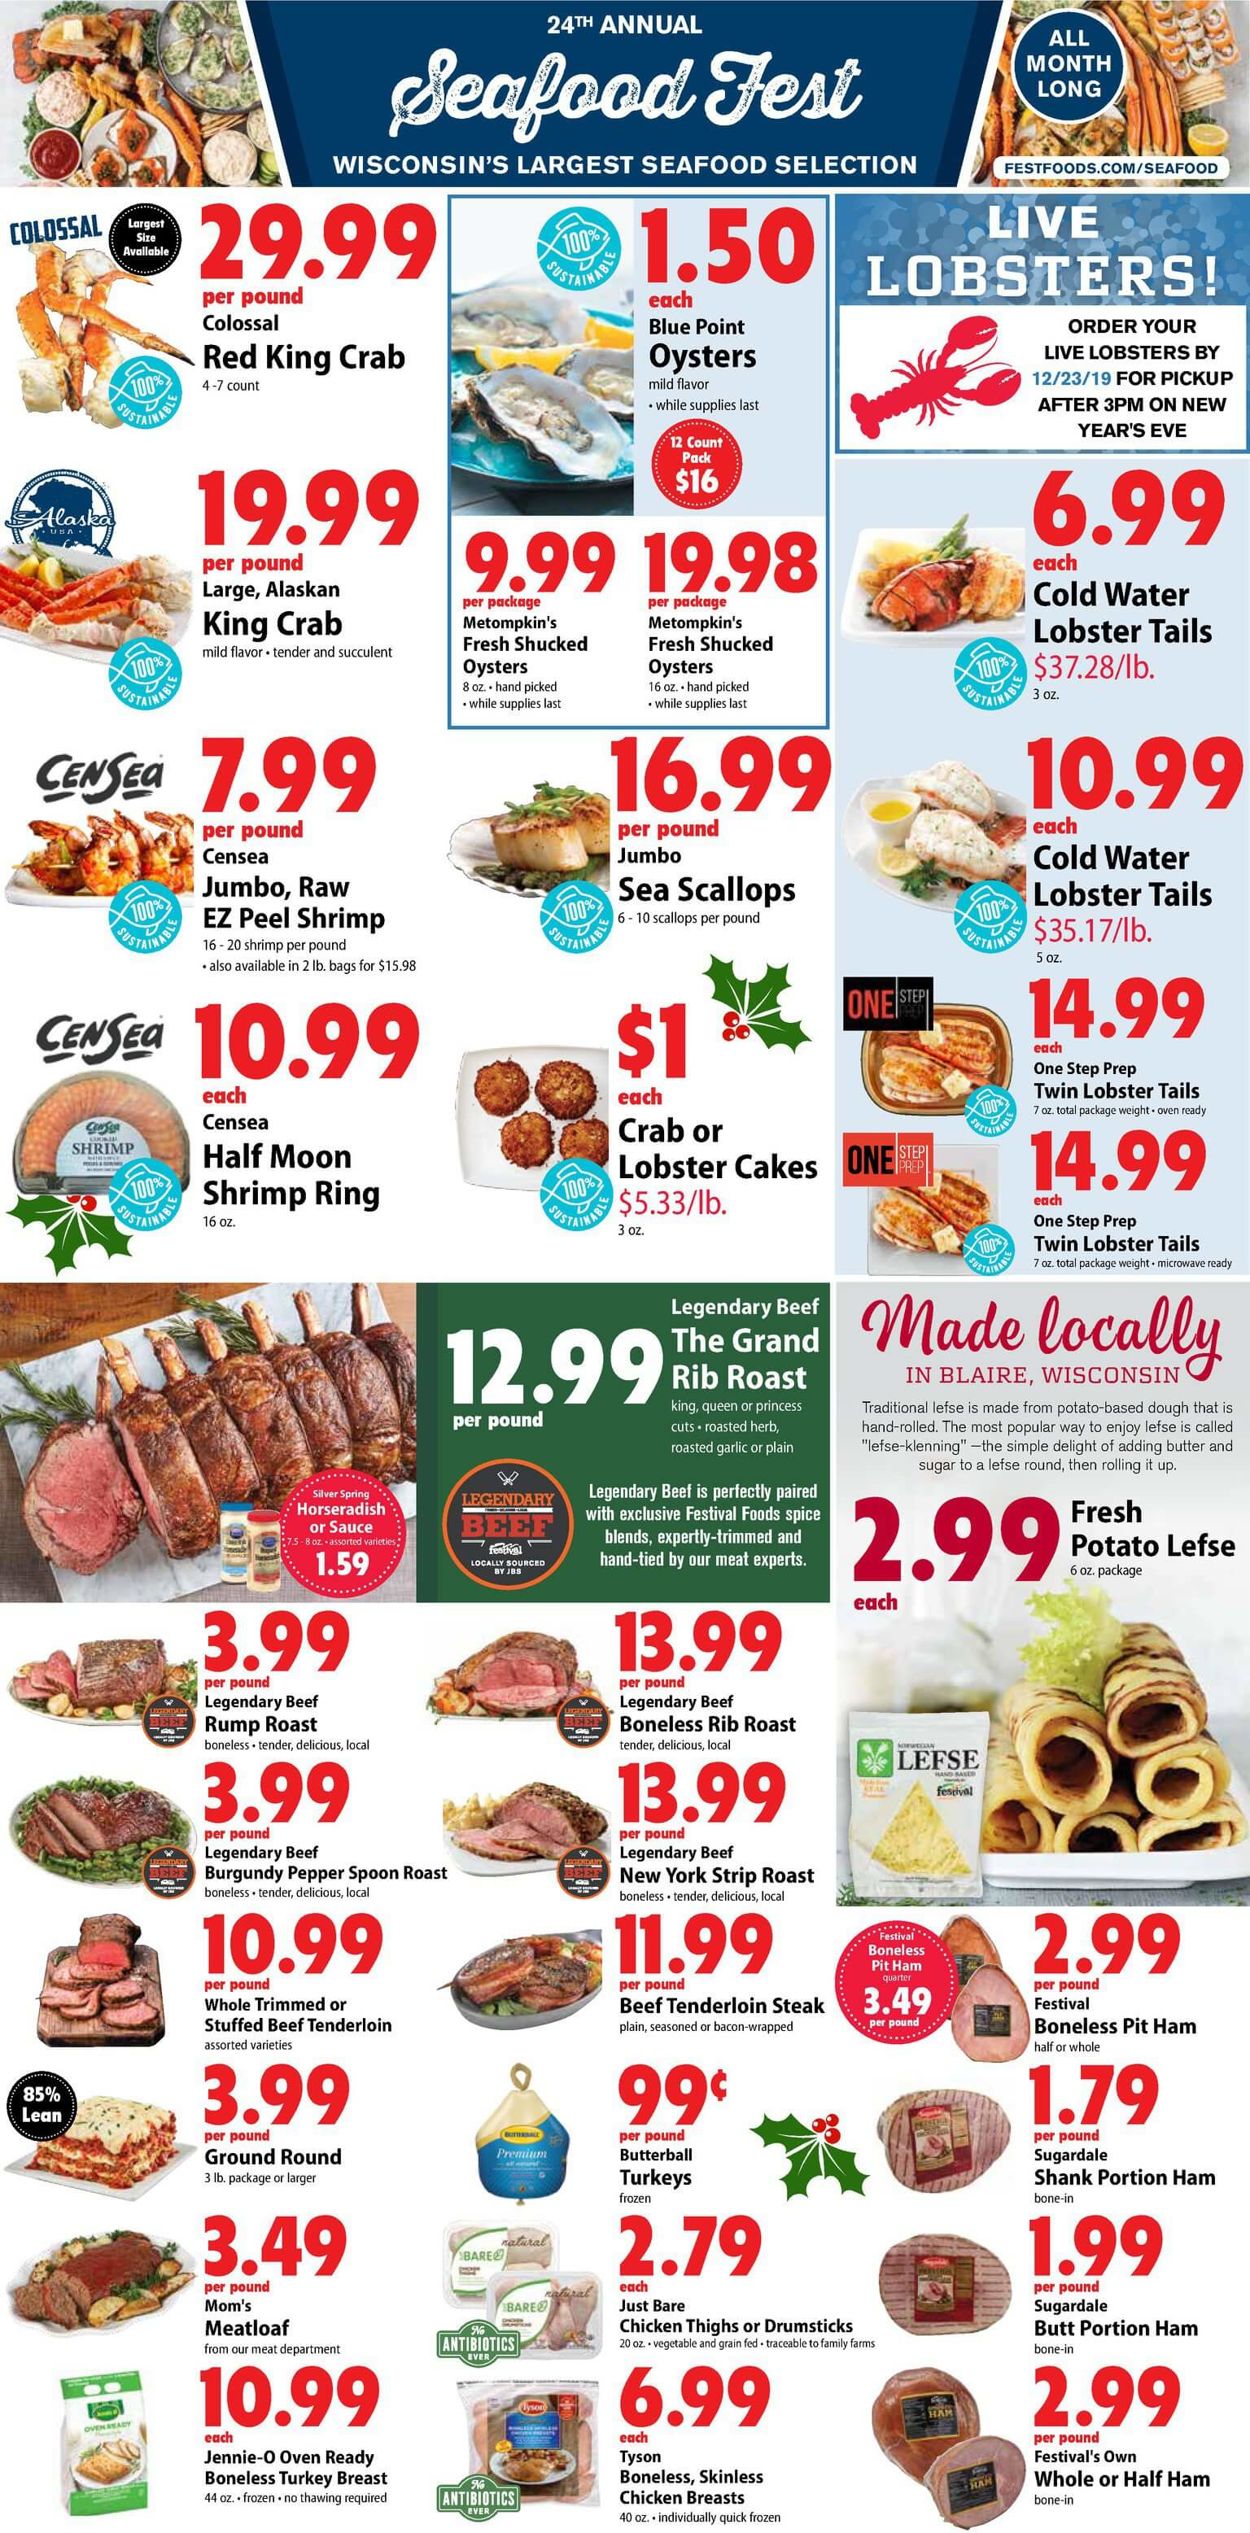 Festival Foods Current weekly ad 12/18 - 12/24/2019 [3] - frequent-ads.com